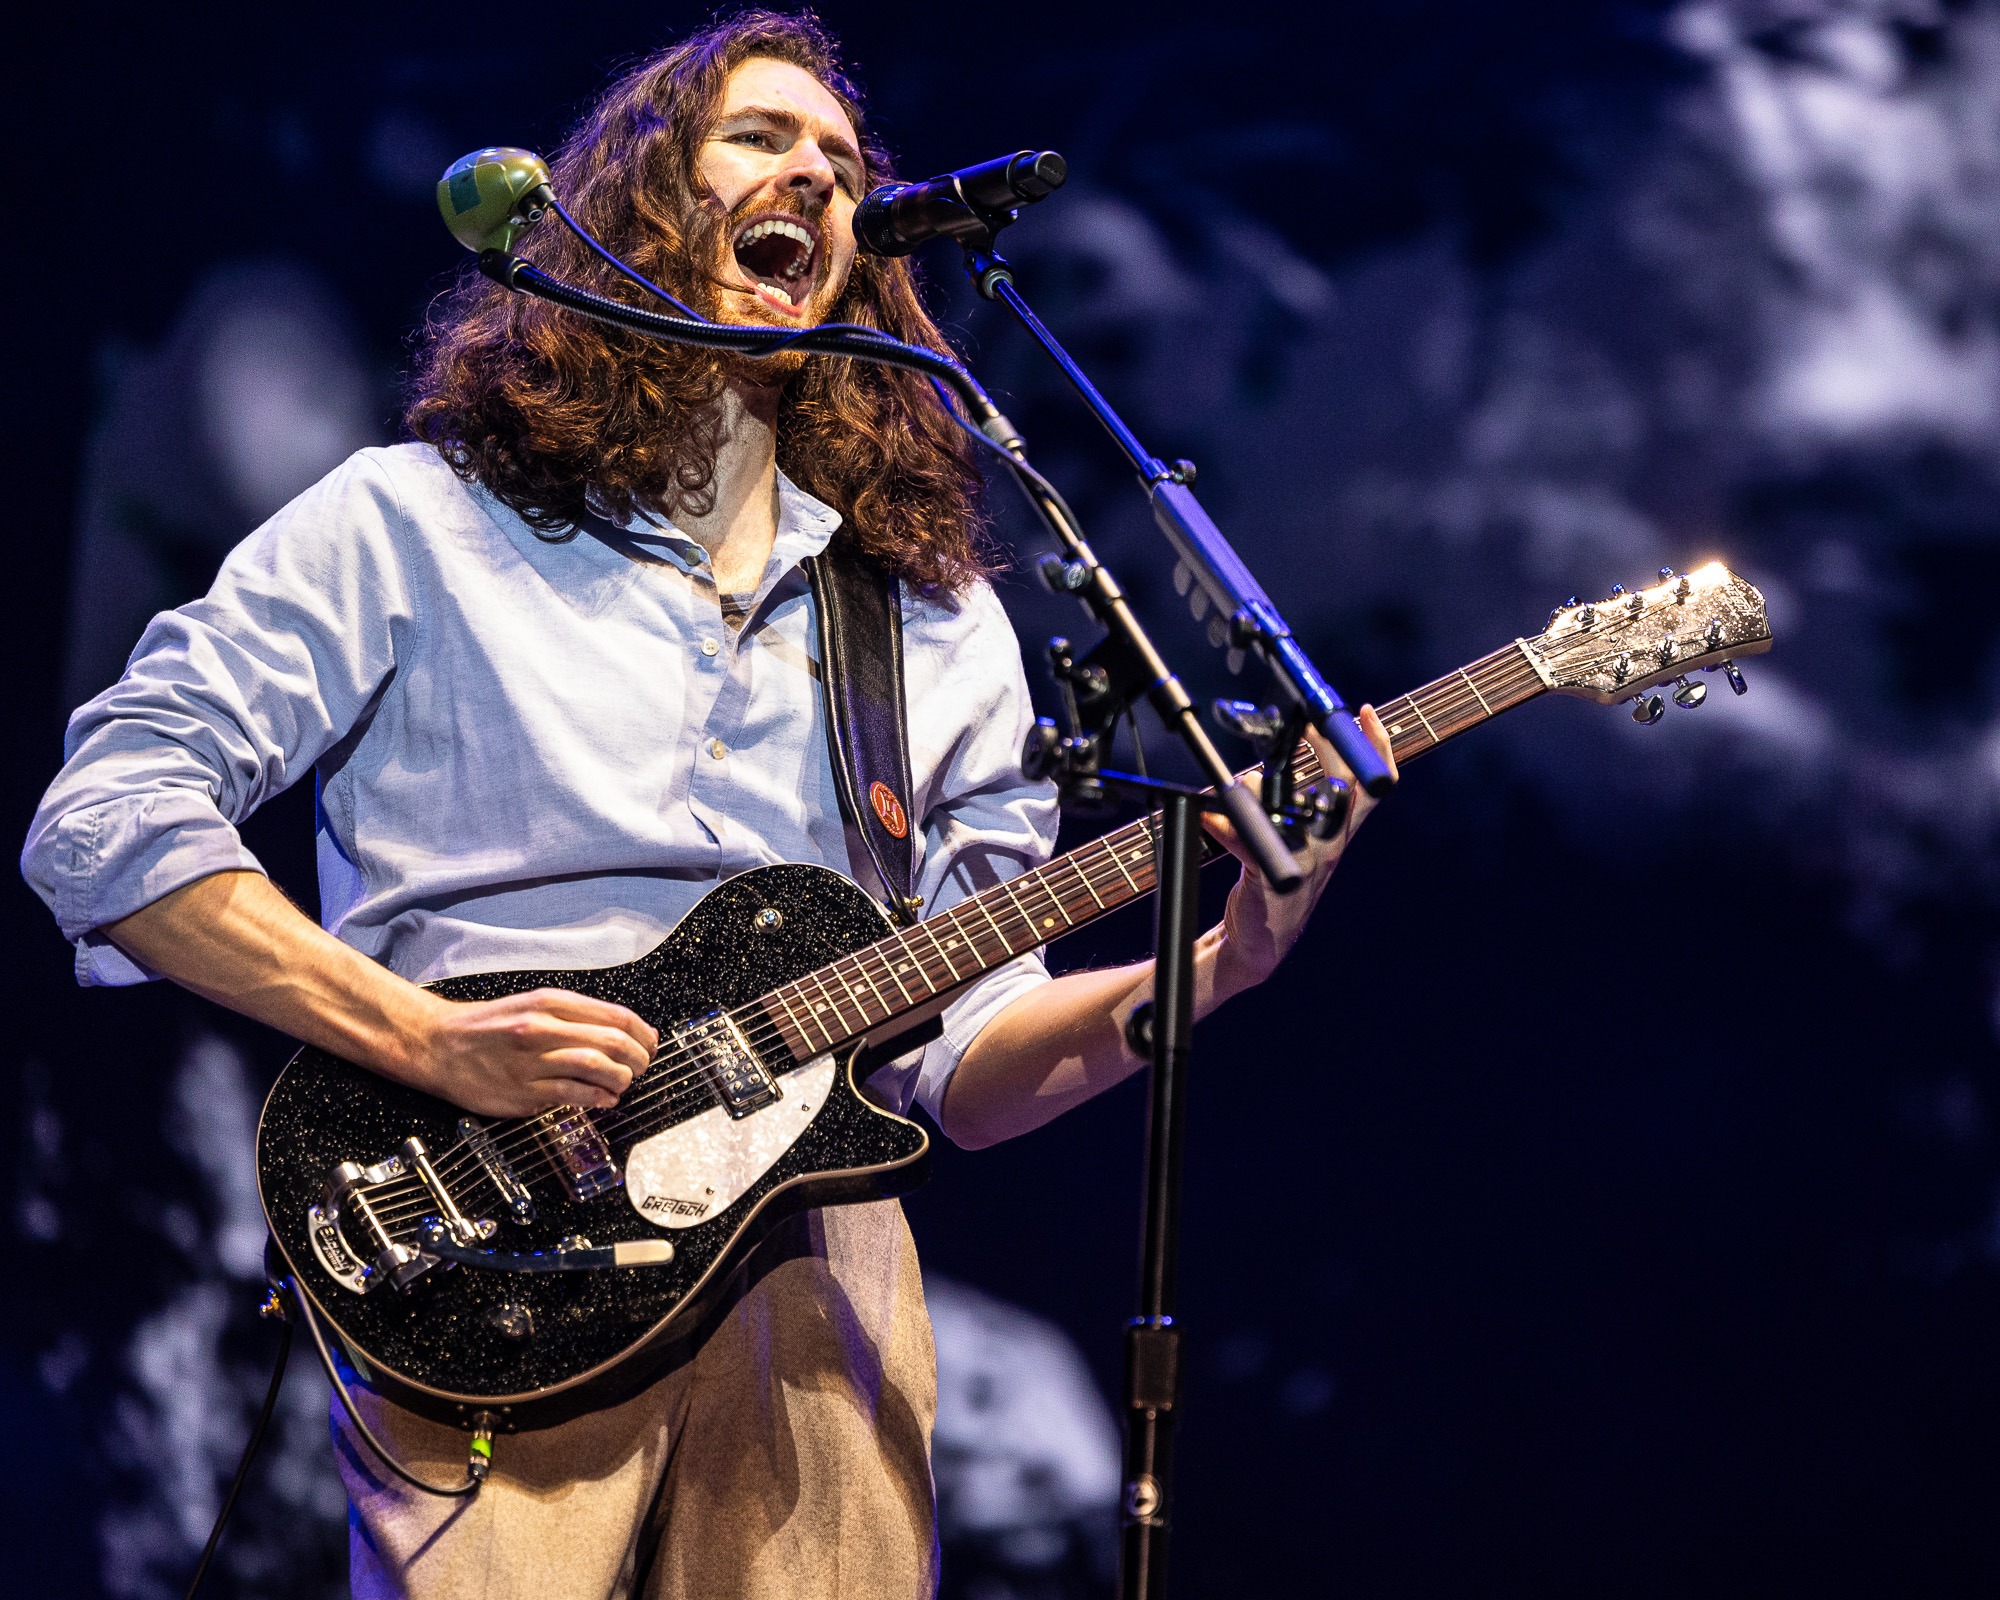 Hozier singing and playing guitar